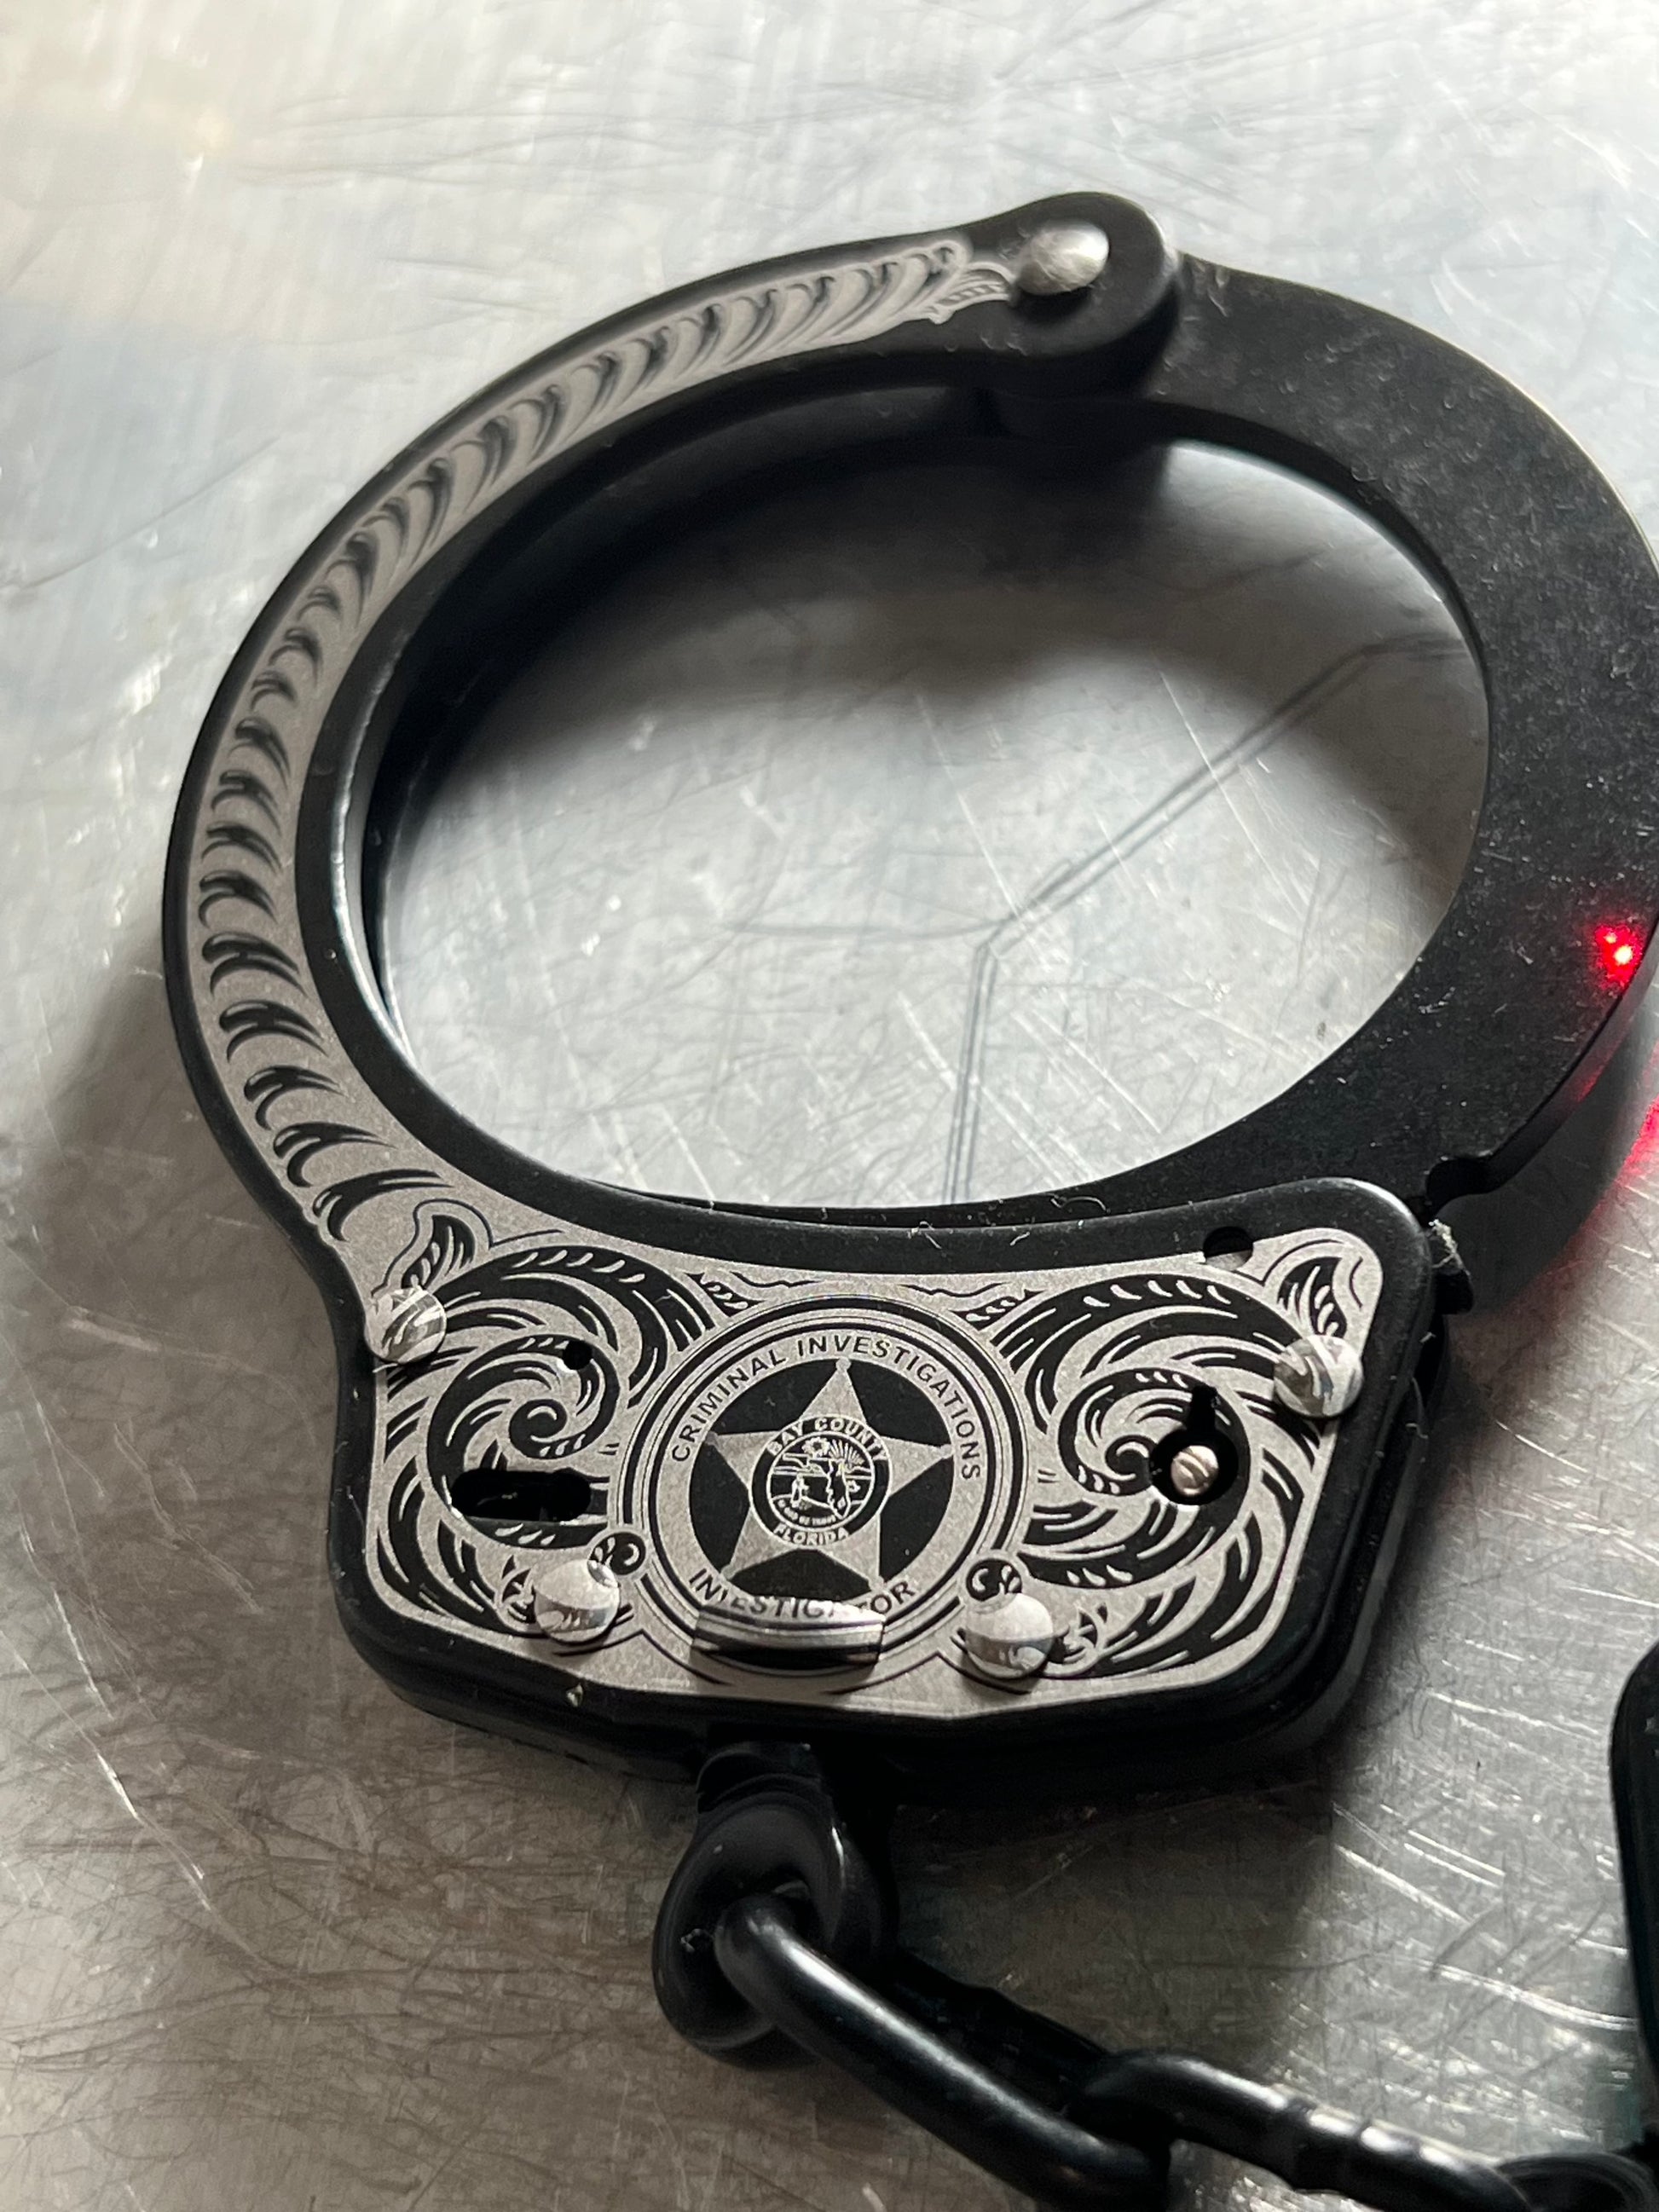 Smith & Wesson Personalized Handcuffs Laser Engraved - Custom Challenge Coins from Beyond The Line 